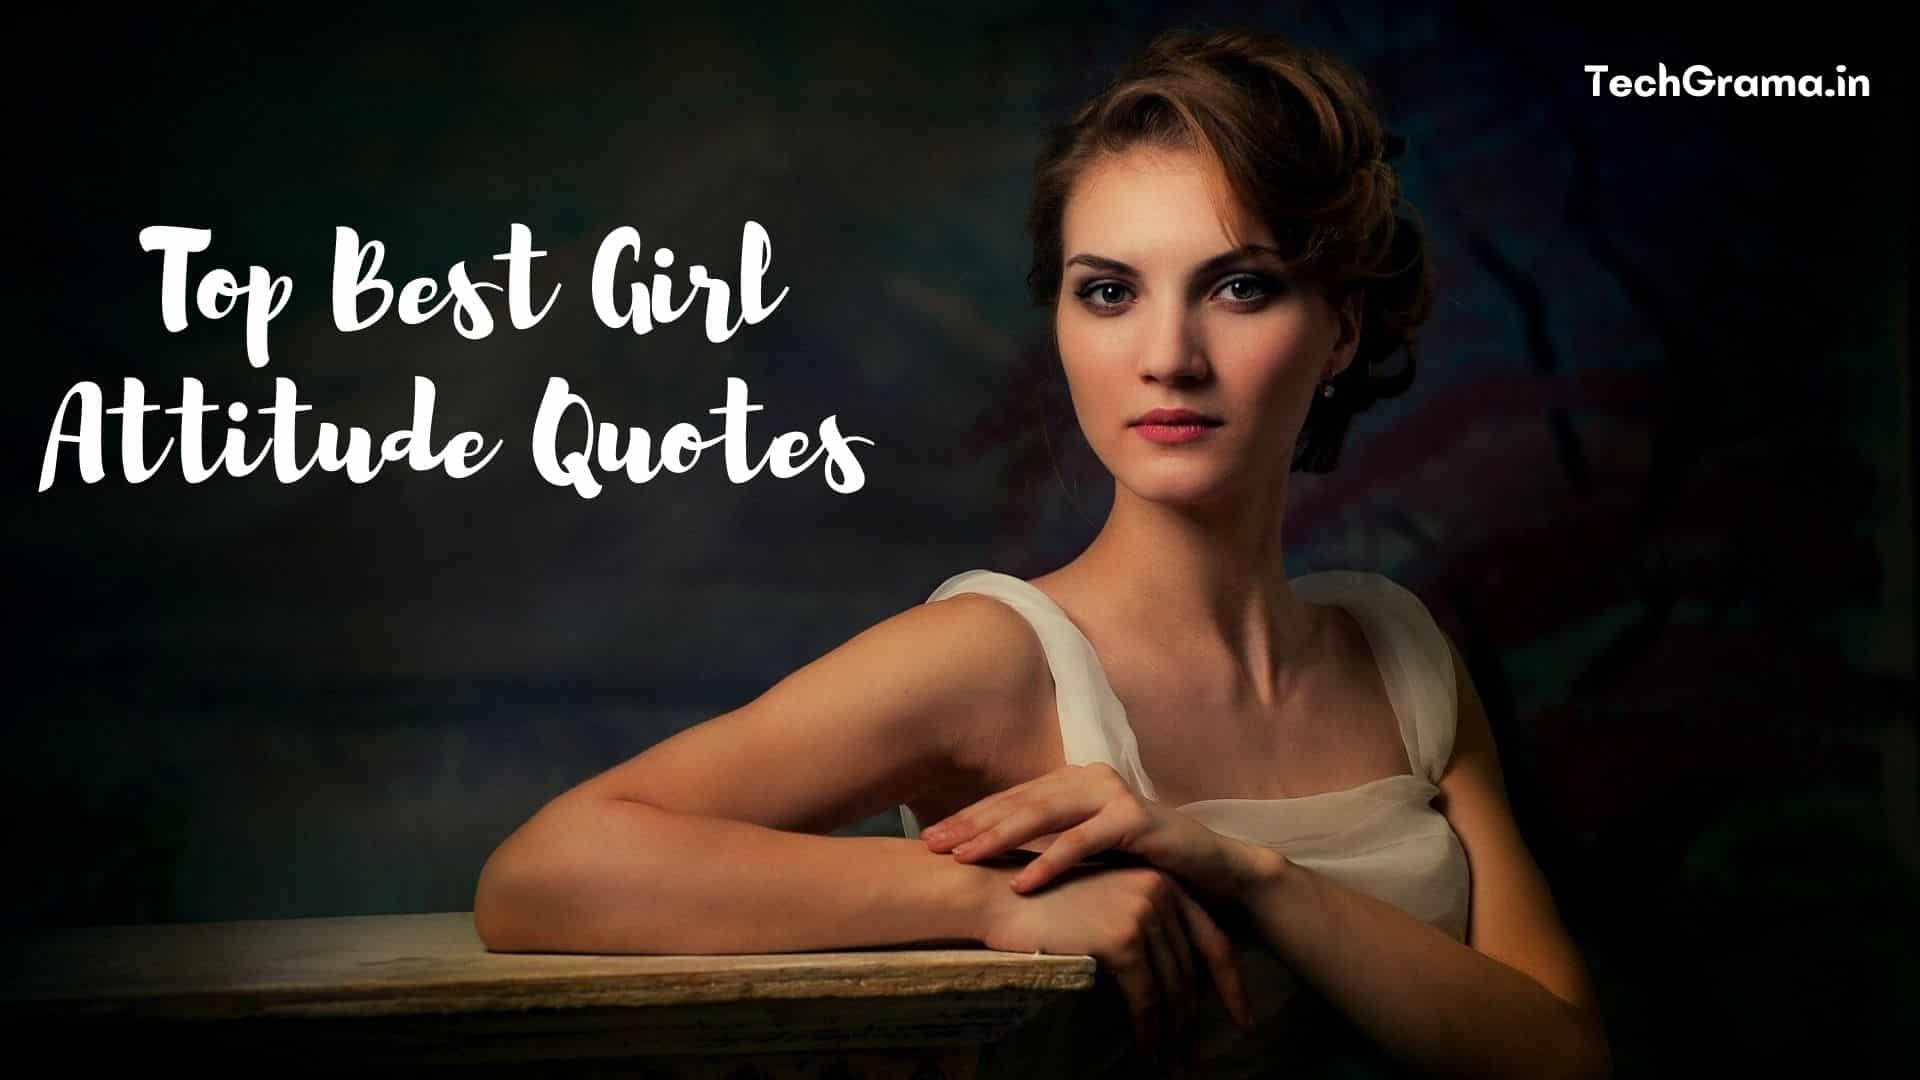 Best Girl Attitude Quotes in English, Girl With Attitude Quotes, Bad Girl Attitude Quotes, Attitude Quotes For Girls For Instagram, Girly Attitude Quotes, Girl Power Attitude Quotes, Attitude Girl Quotes For Instagram, Good Girl Attitude Quotes, Attitude Quotes on Girl, Quotes About Girl Power, Girl Quotes About Herself, Short Quotes About Girl Power, Attitude Captions For Instagram For Girls.